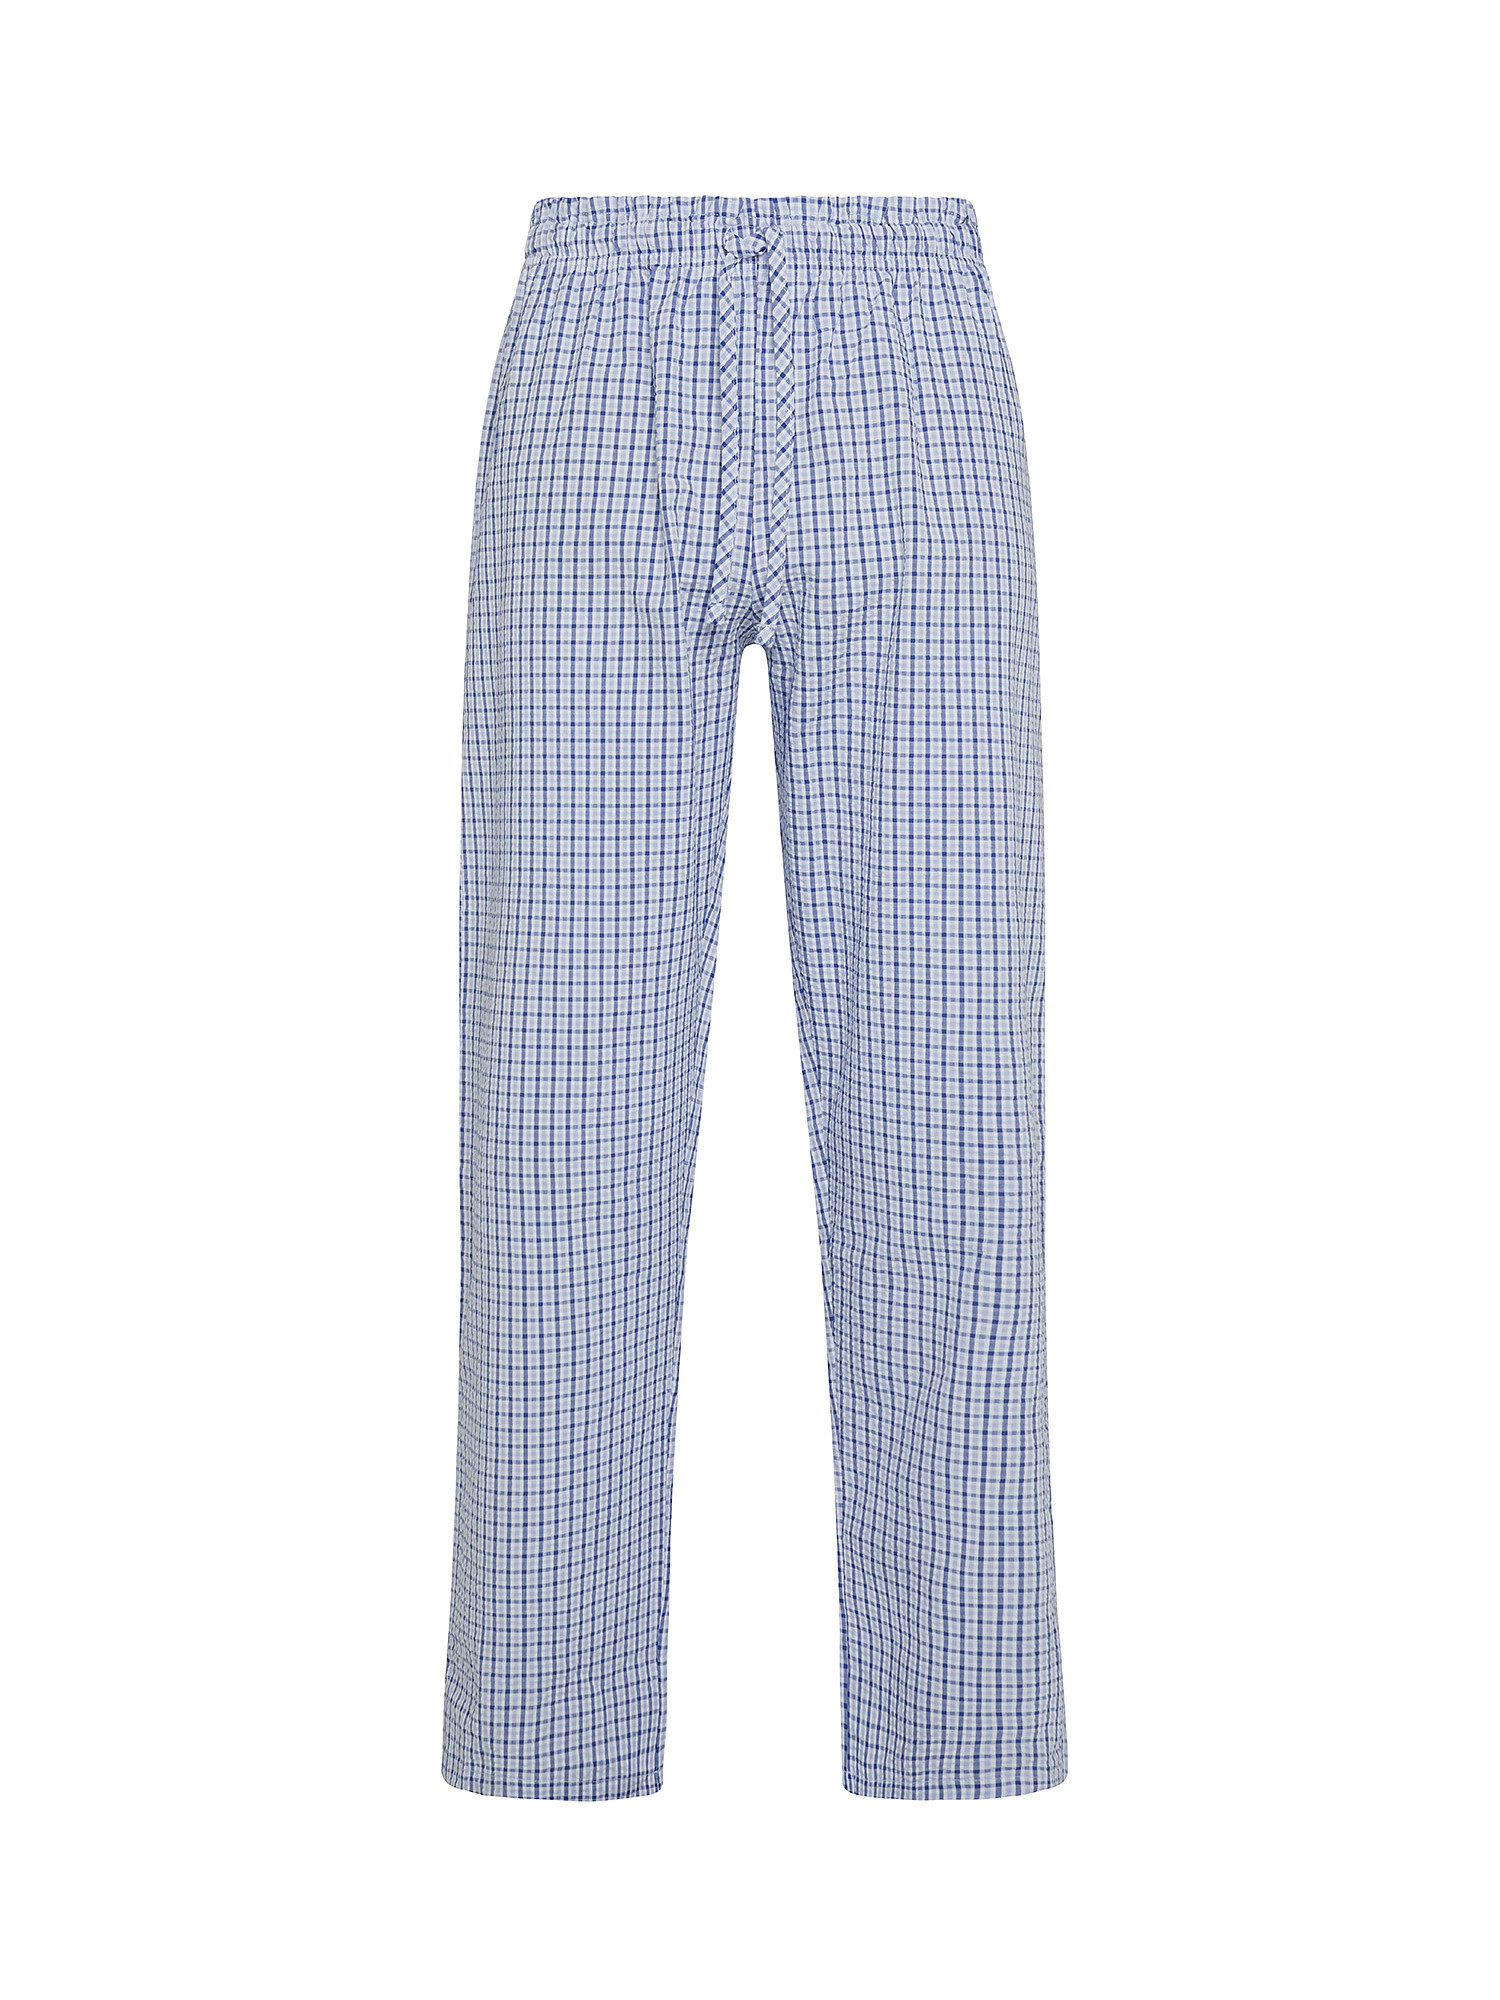 Seersucker check cotton trousers, Multicolor, large image number 0